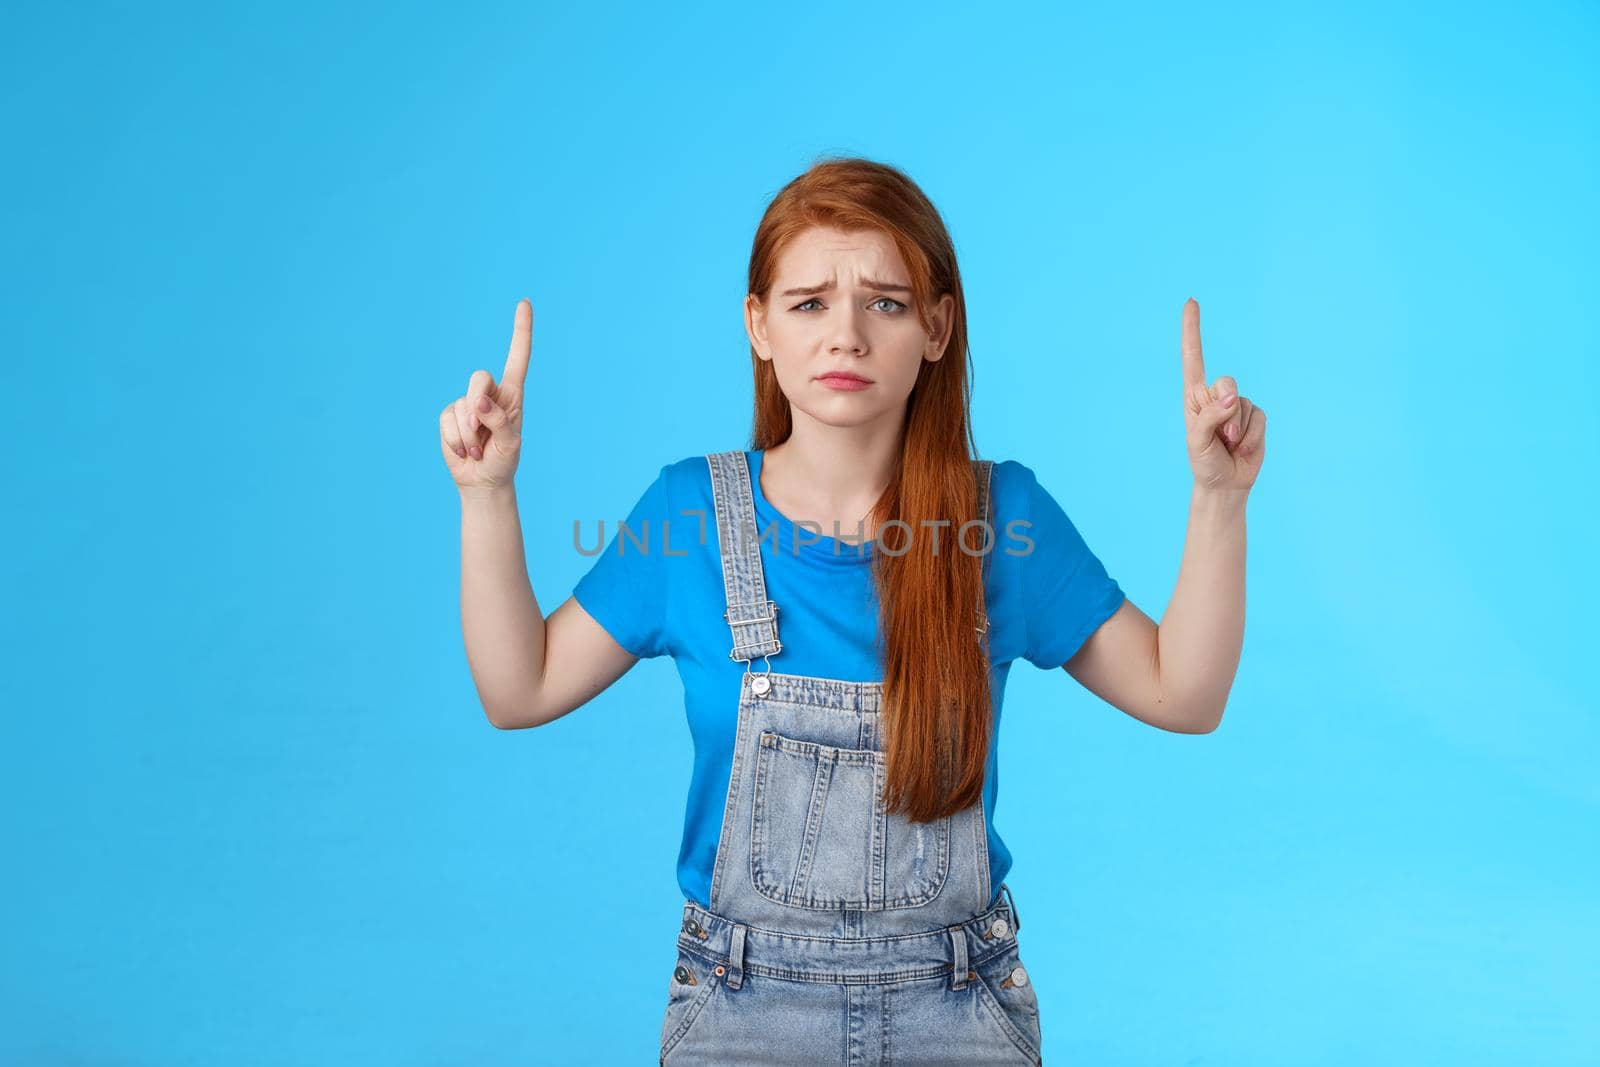 Doubtful concerned unsure redhead female making important decision, grimacing hesitant displeased, point up promo, top copy space, feel uncertain unlikely buy suspicious product, blue background.